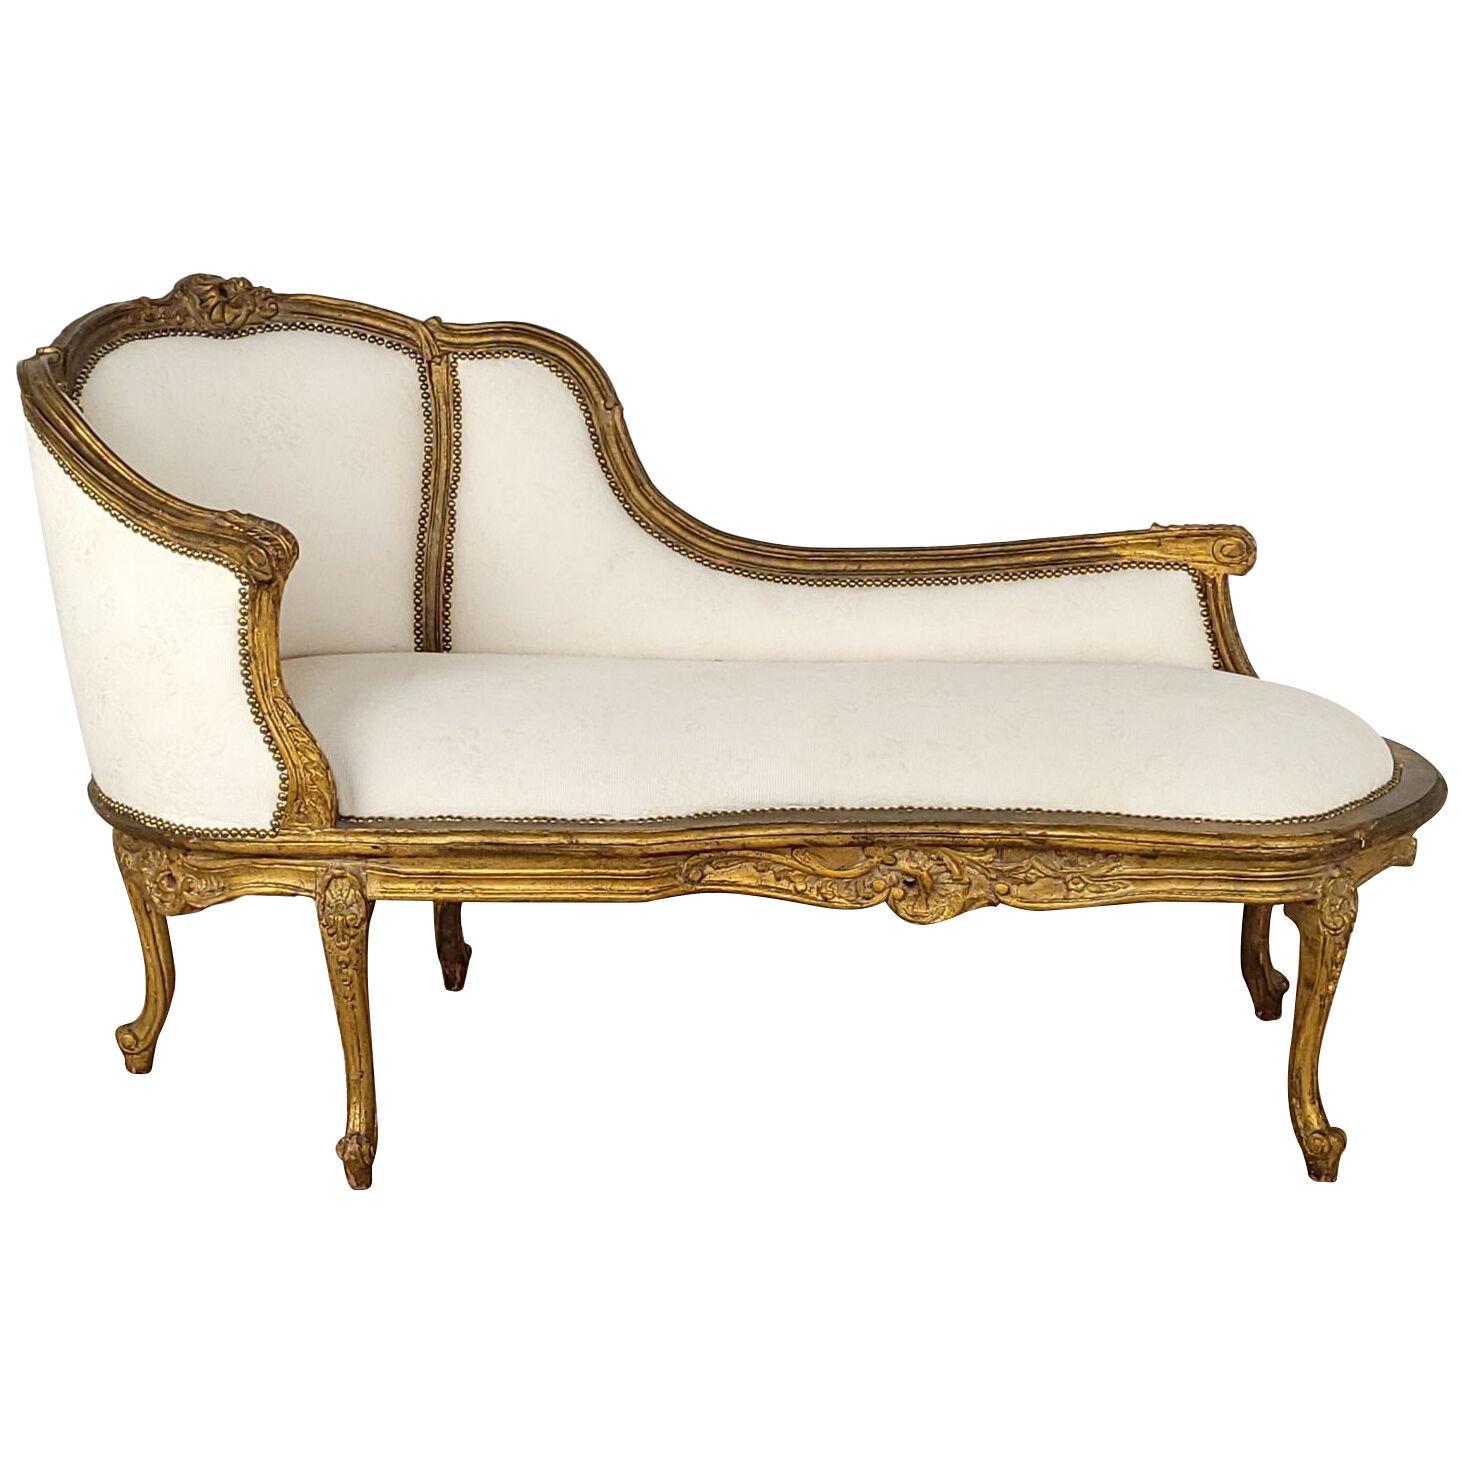 Napoleon III Carved and Gilt Chaise Lounge / Fainting Couch, France circa 1870